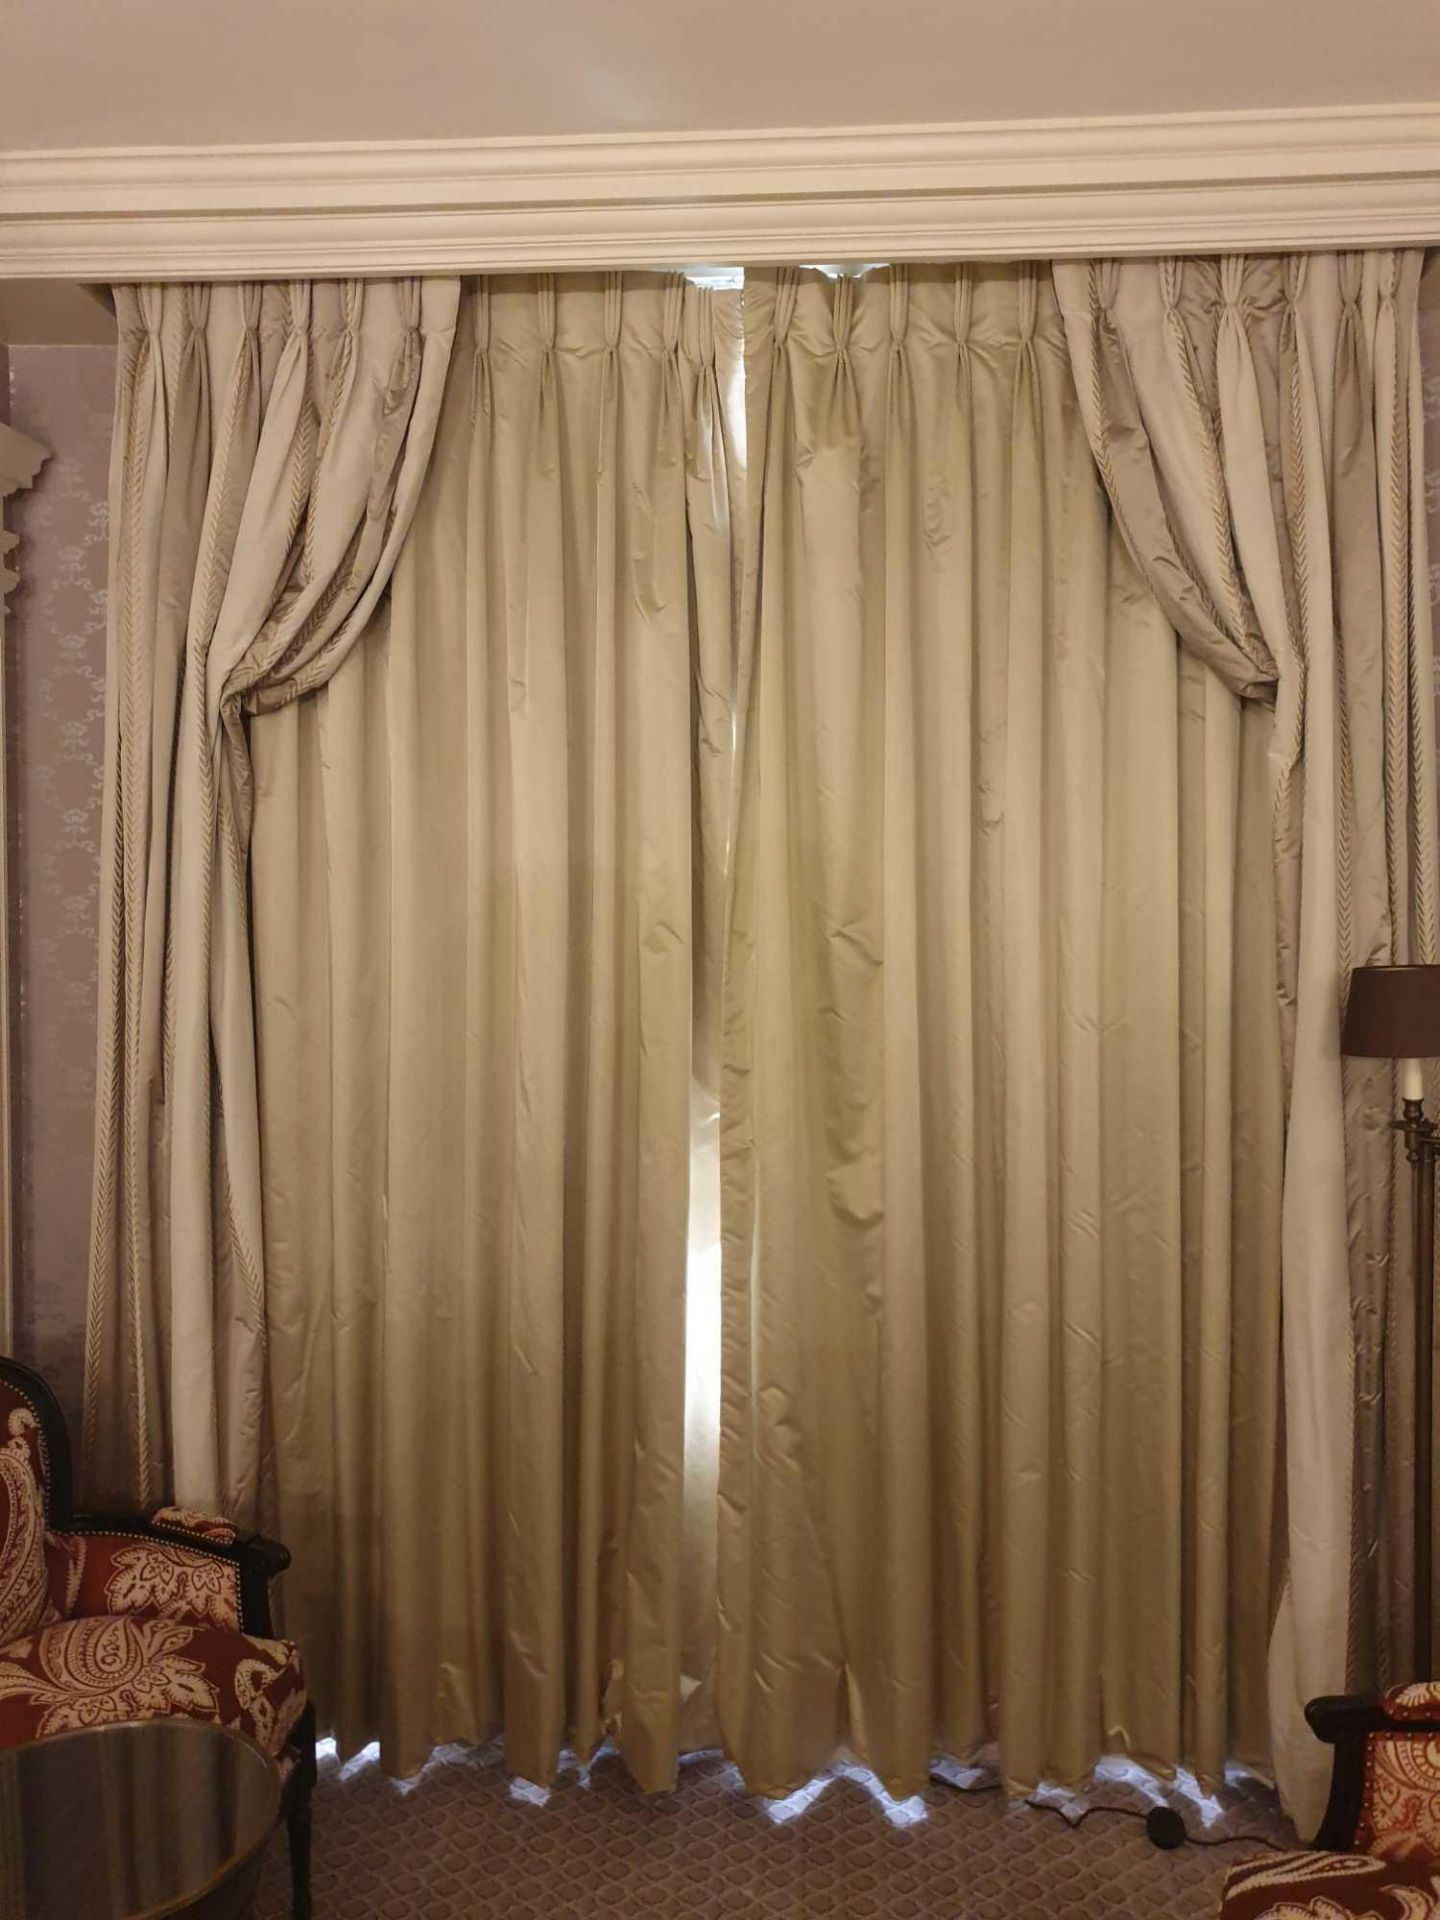 A Pair Of Silk Drapes In Greys And Creams With Intermittent Stitched Corn Pattern In Gold 250 x